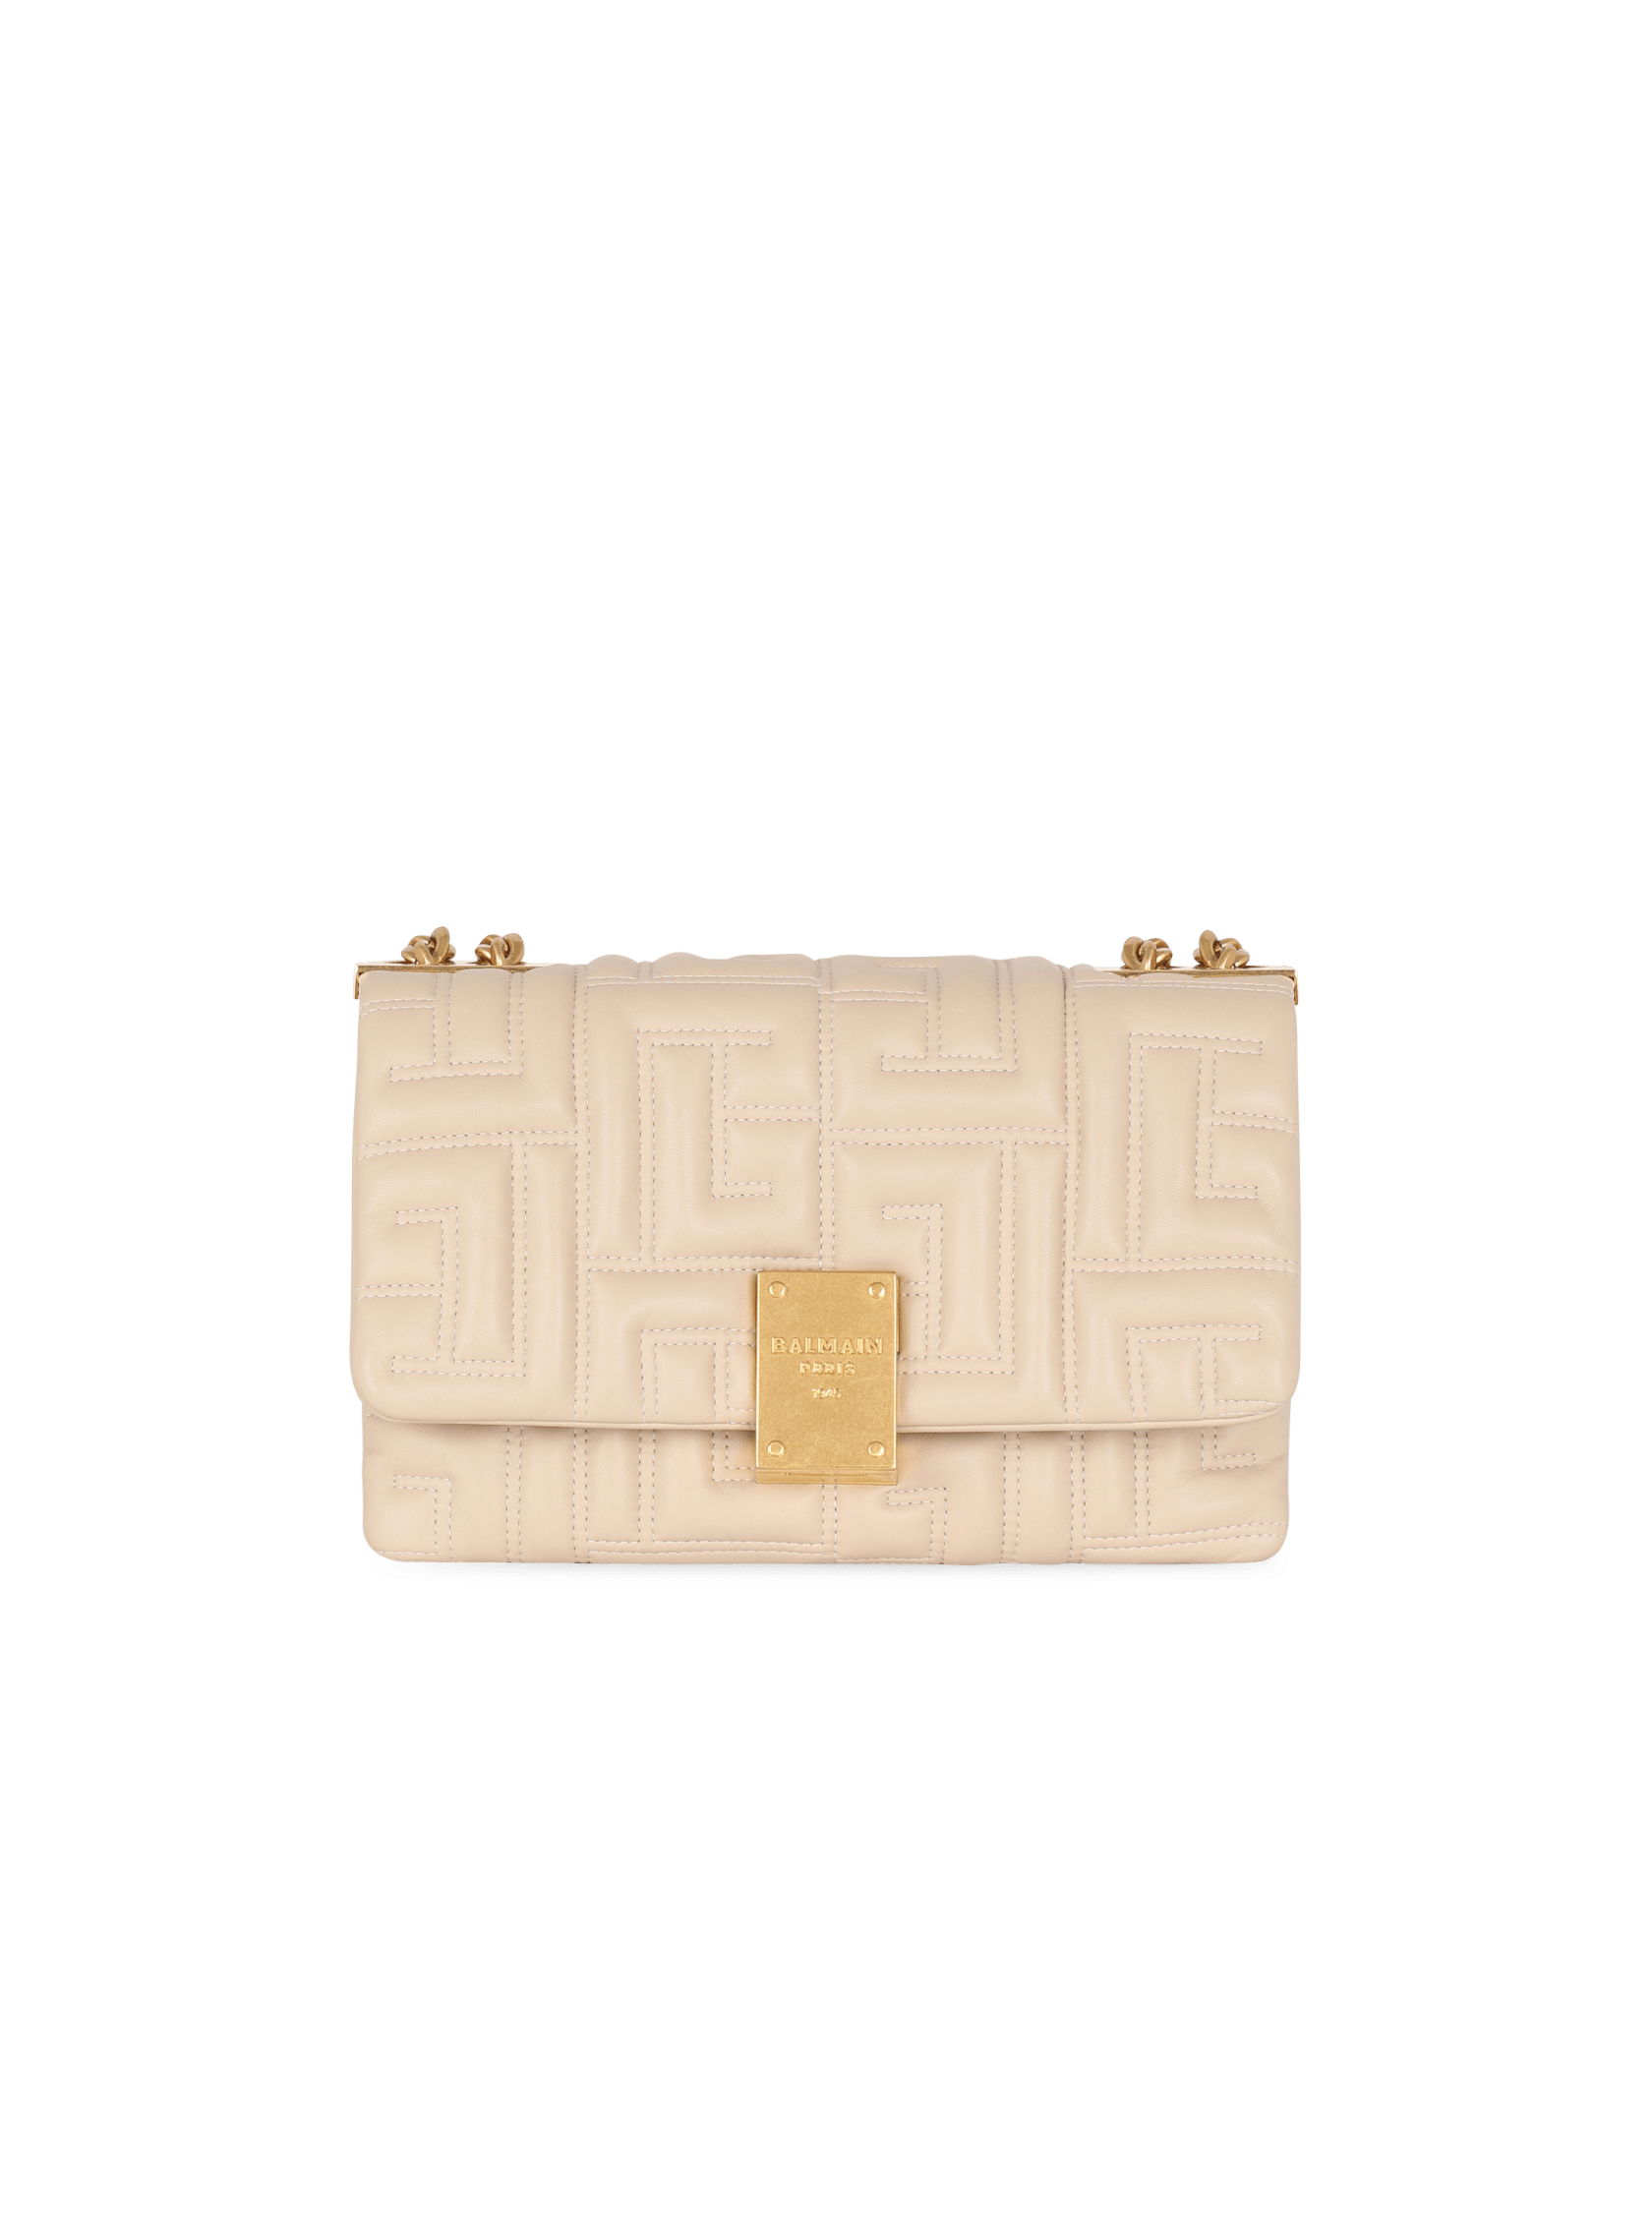 balmain.com | 1945 Soft small bag in quilted leather